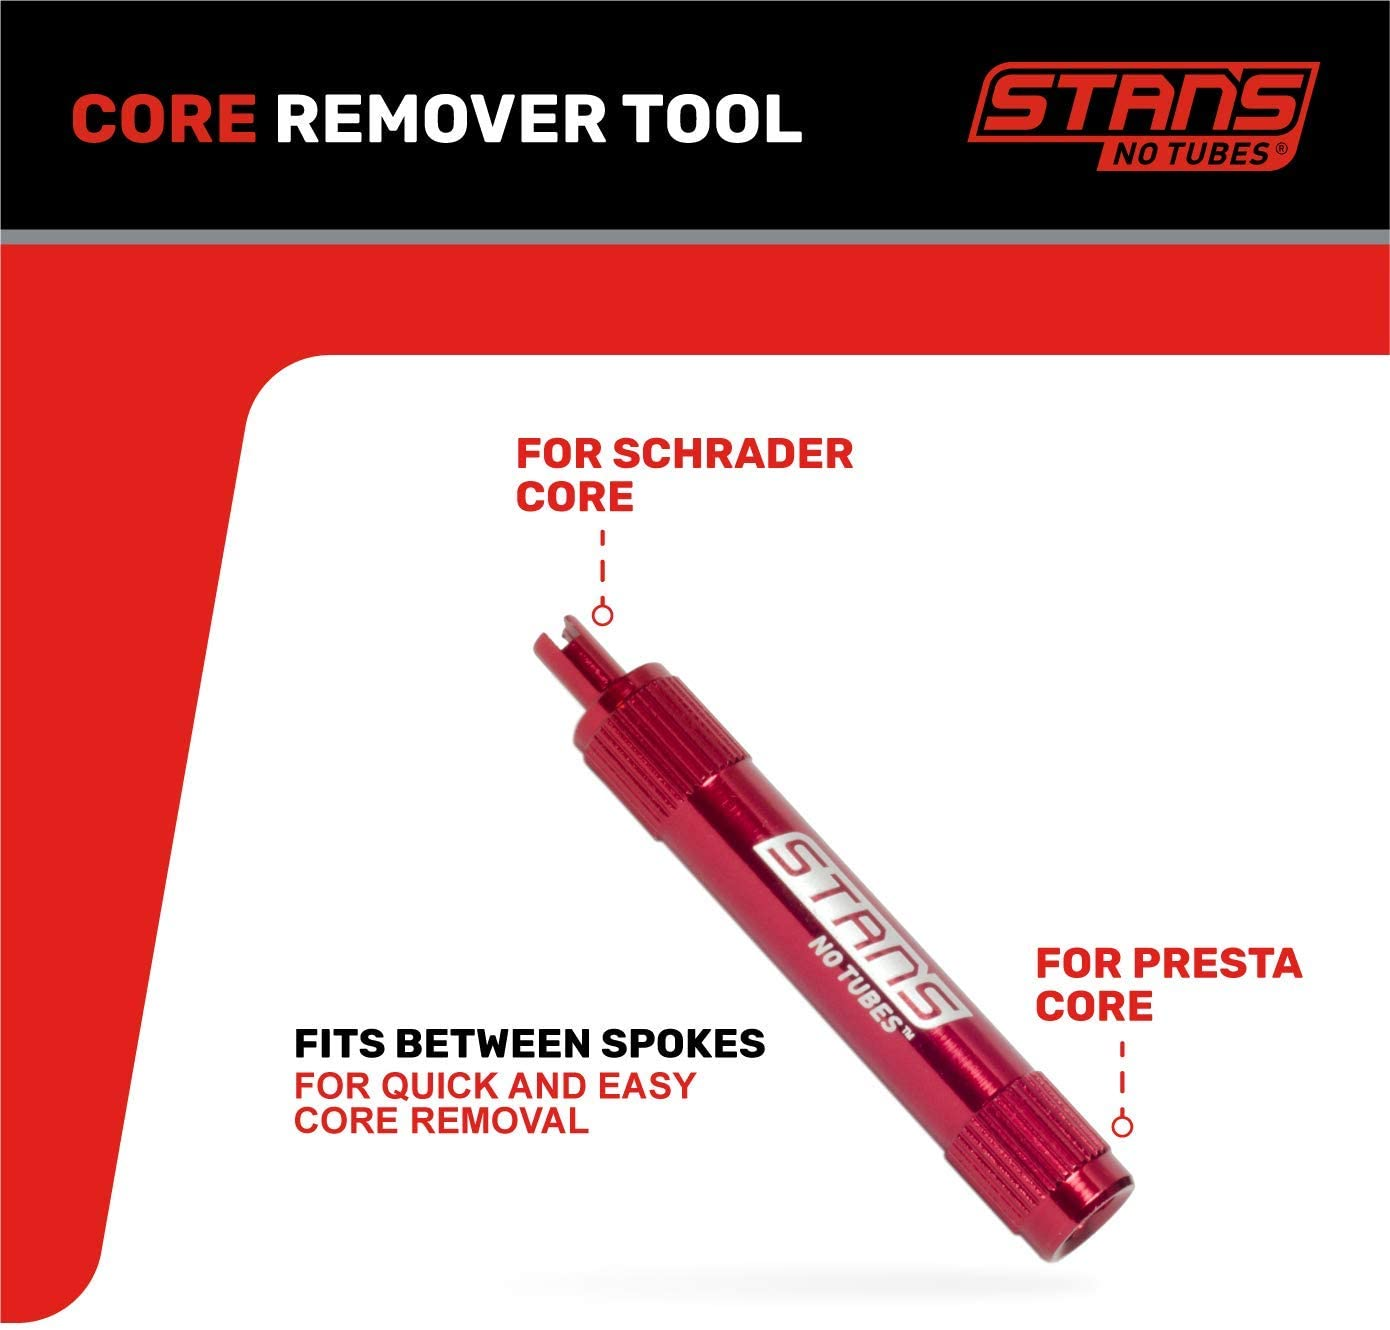 To repair a tubeless tire you will need a valve core remover like this.